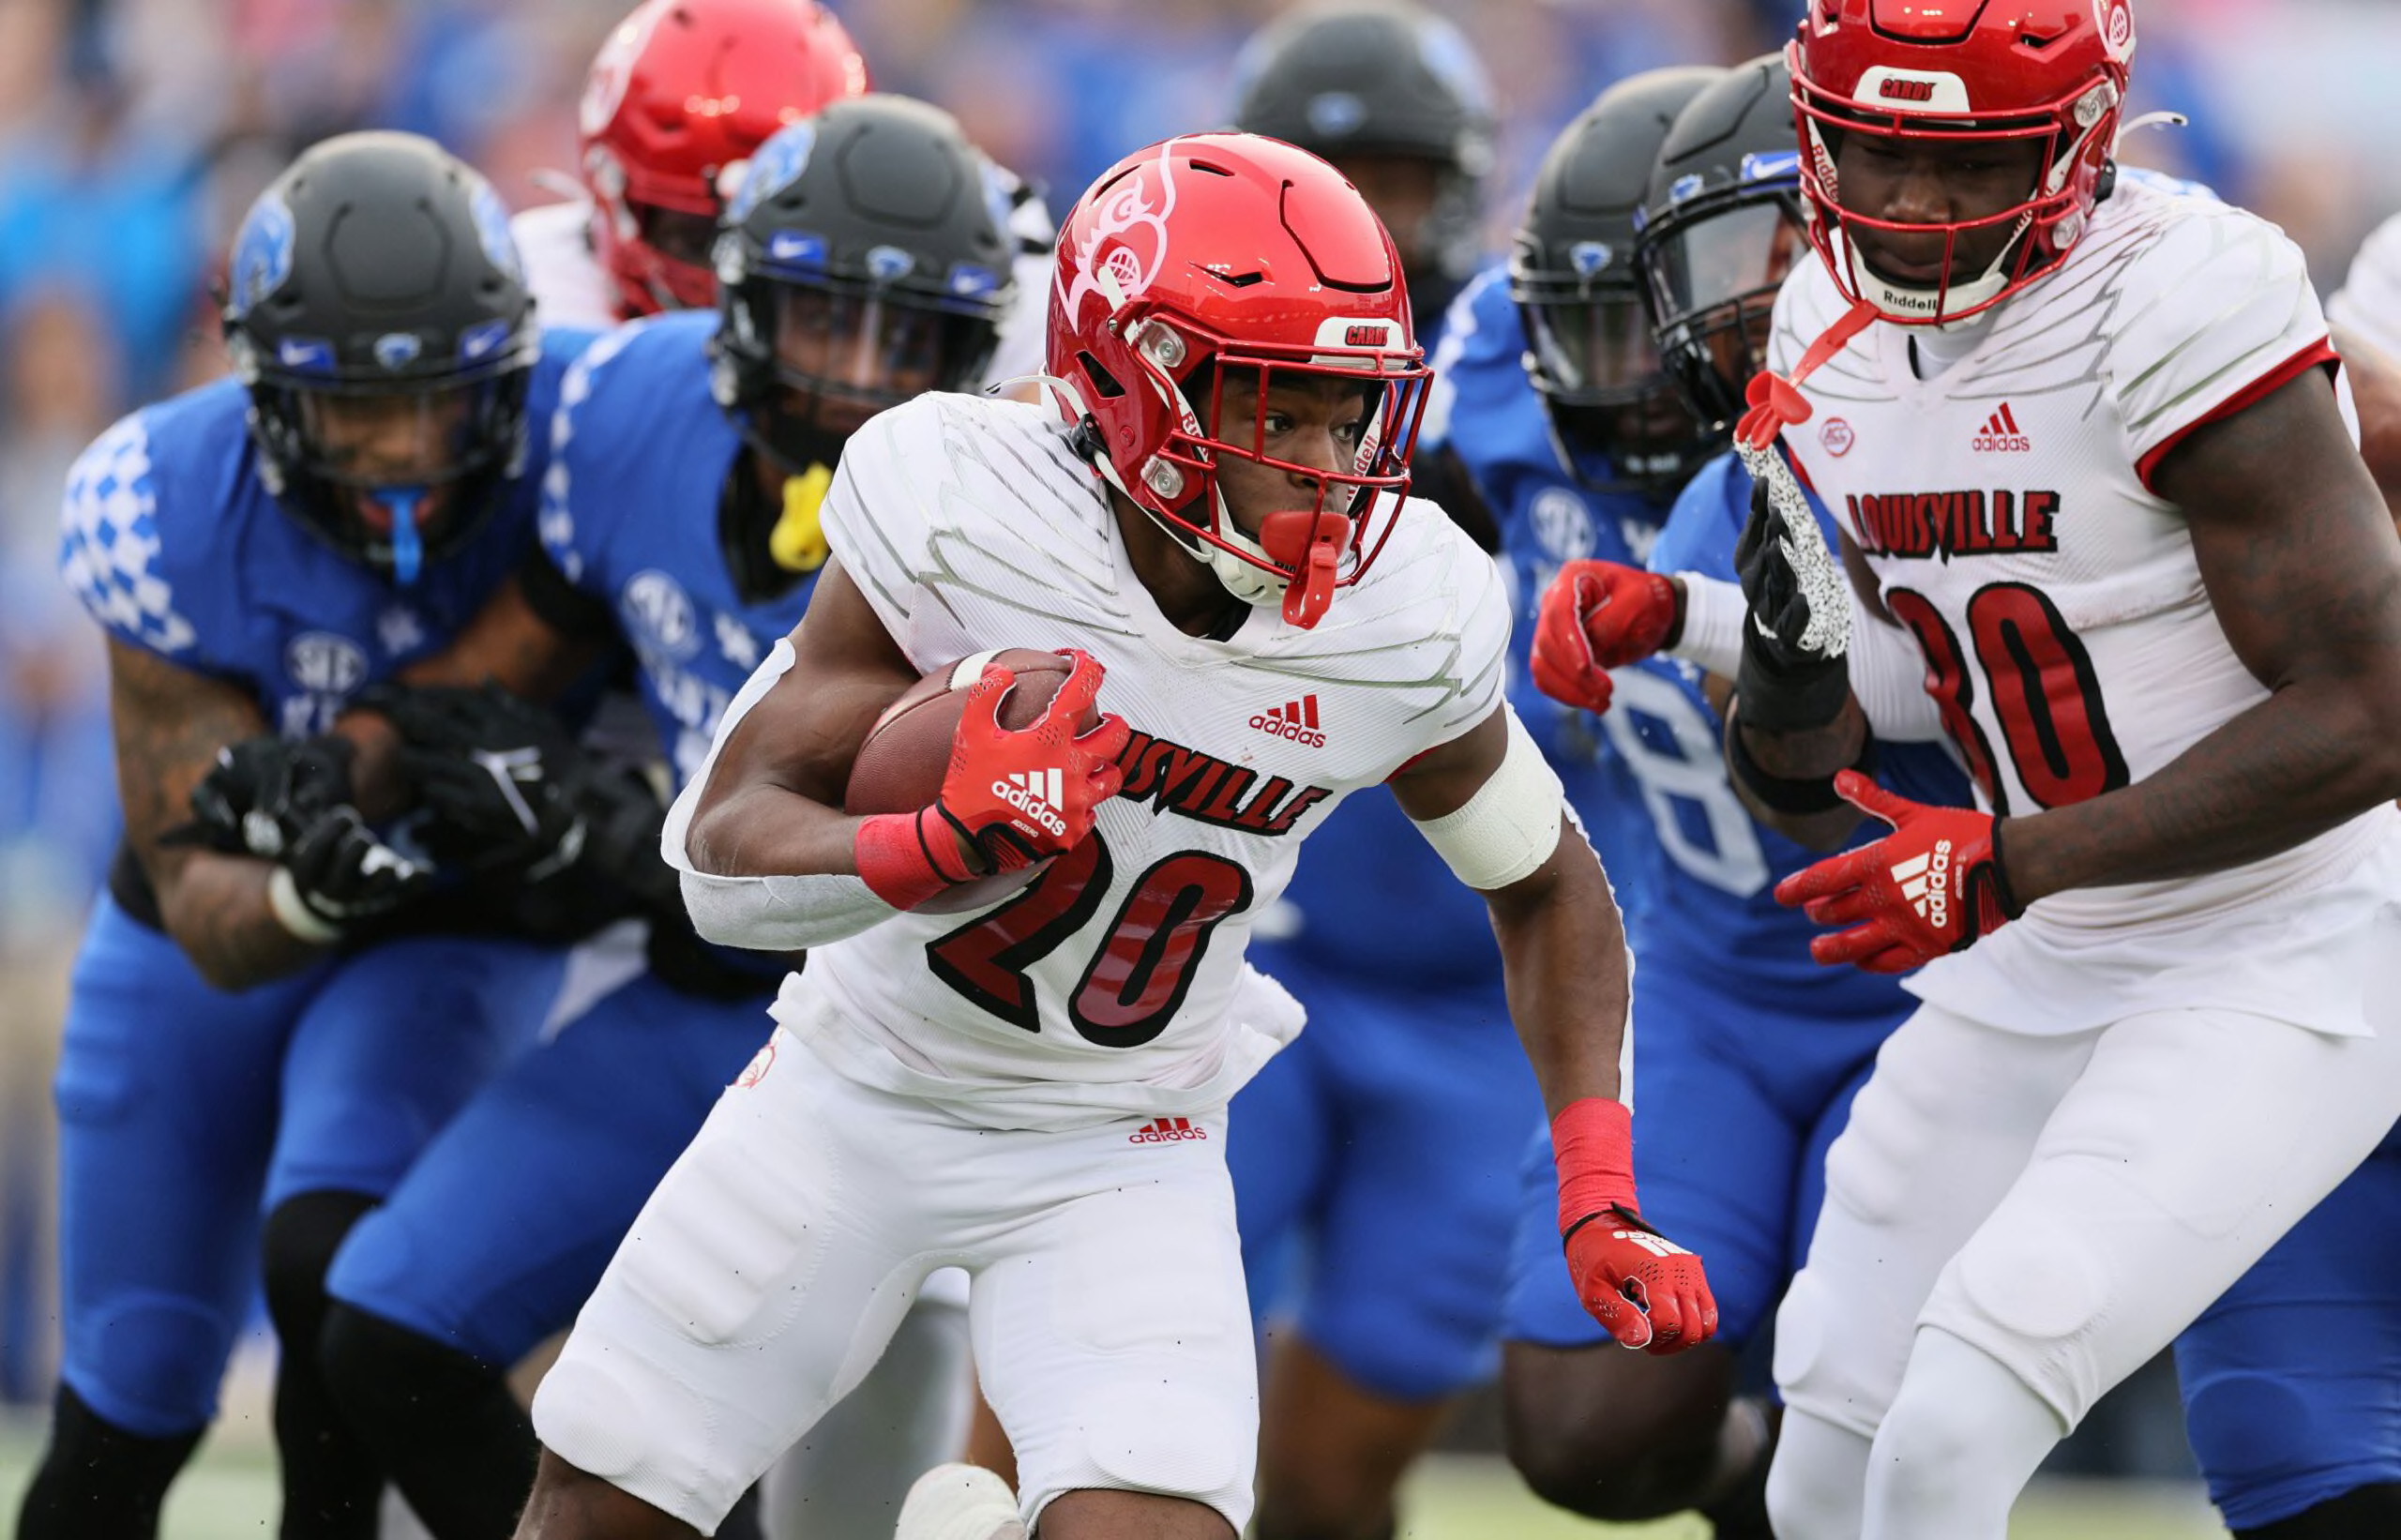 Louisville dominates in blowout